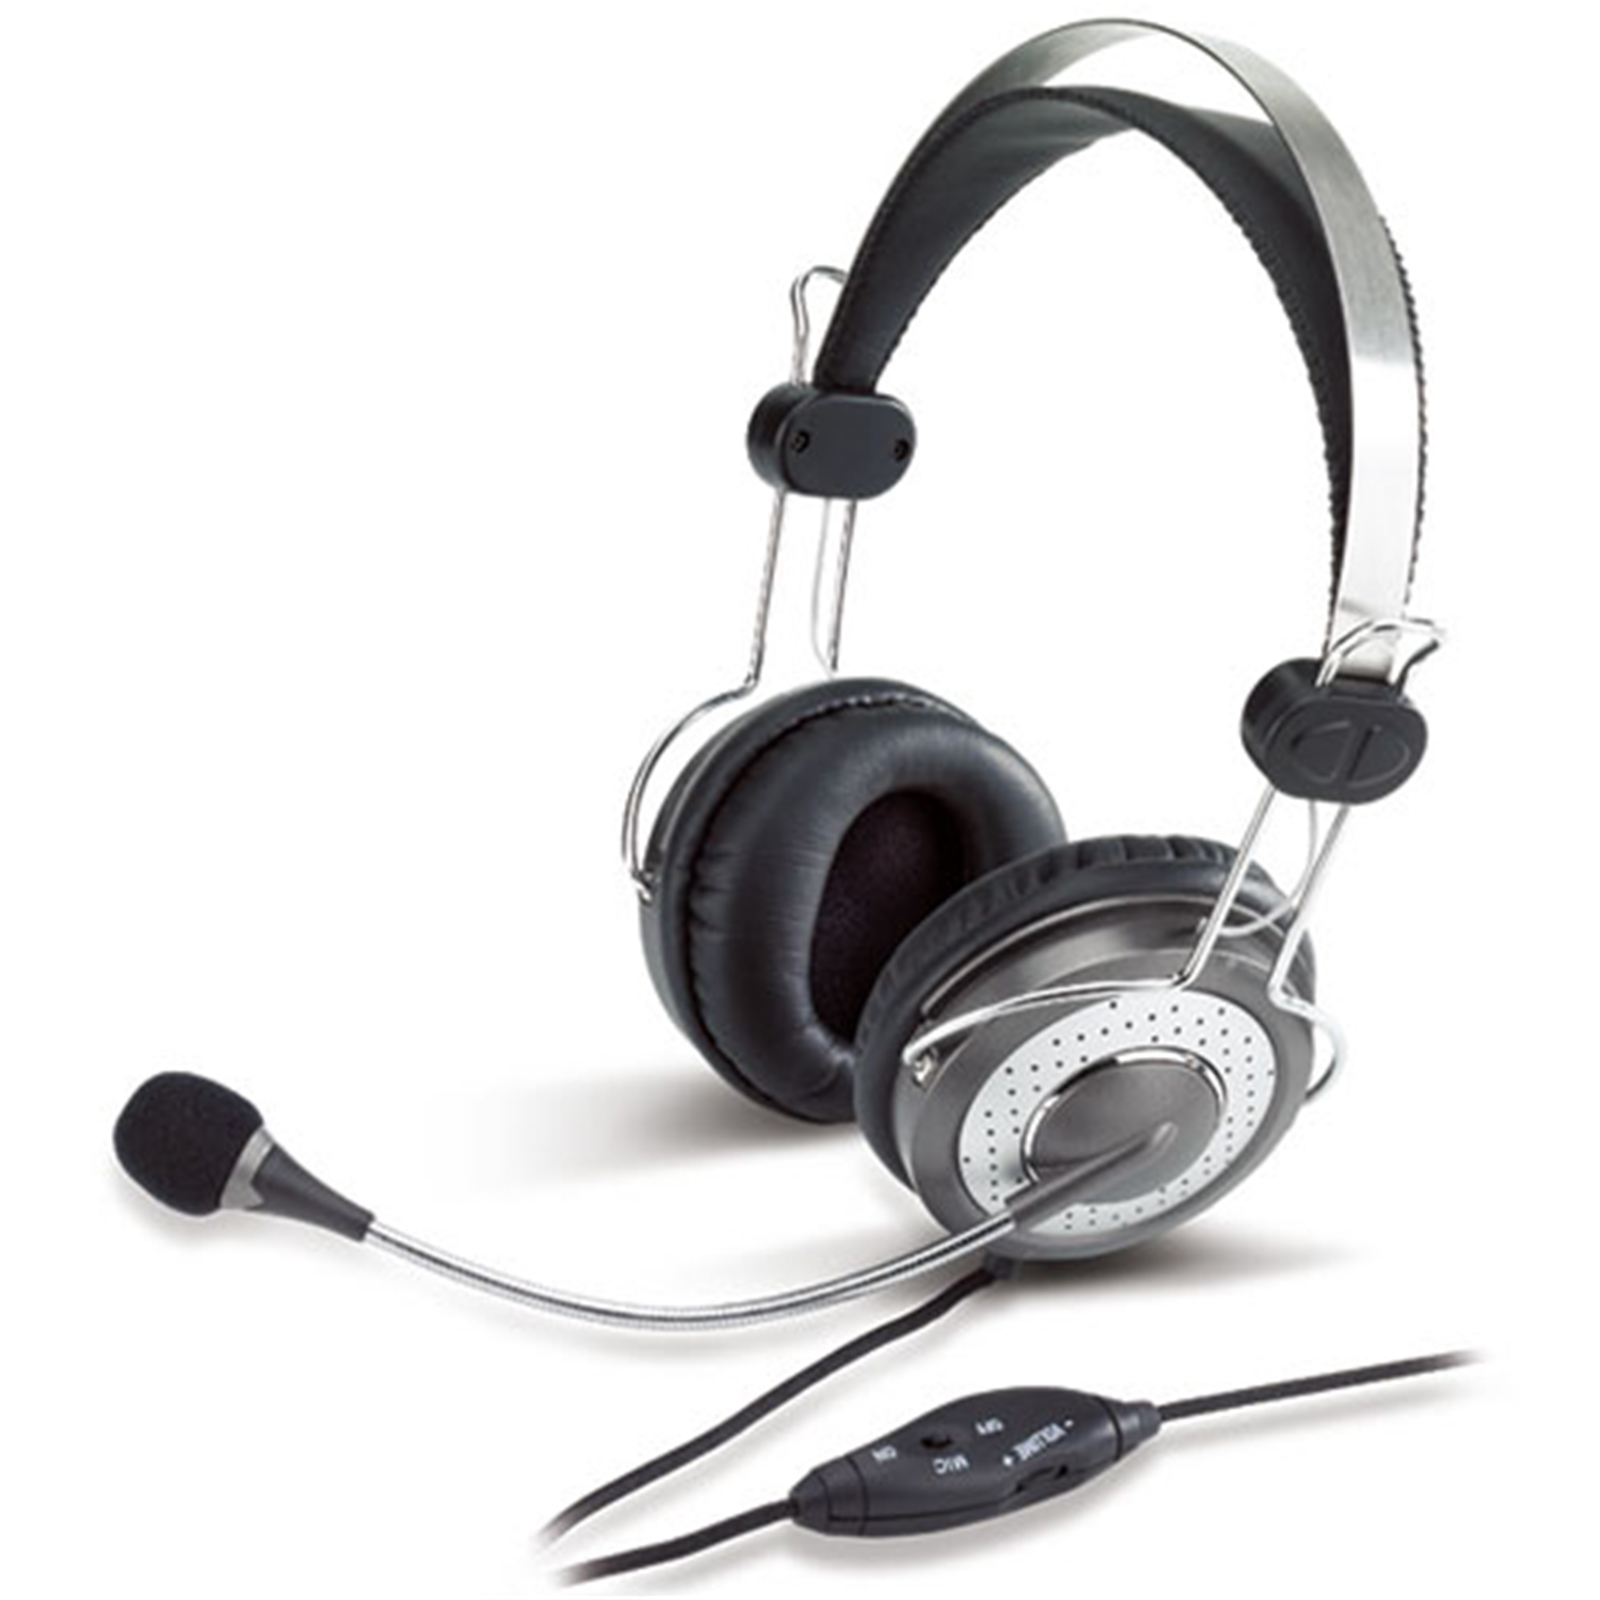 Genius HS-04SU Luxury Headset with Mic, 2x 3.5mm Connection